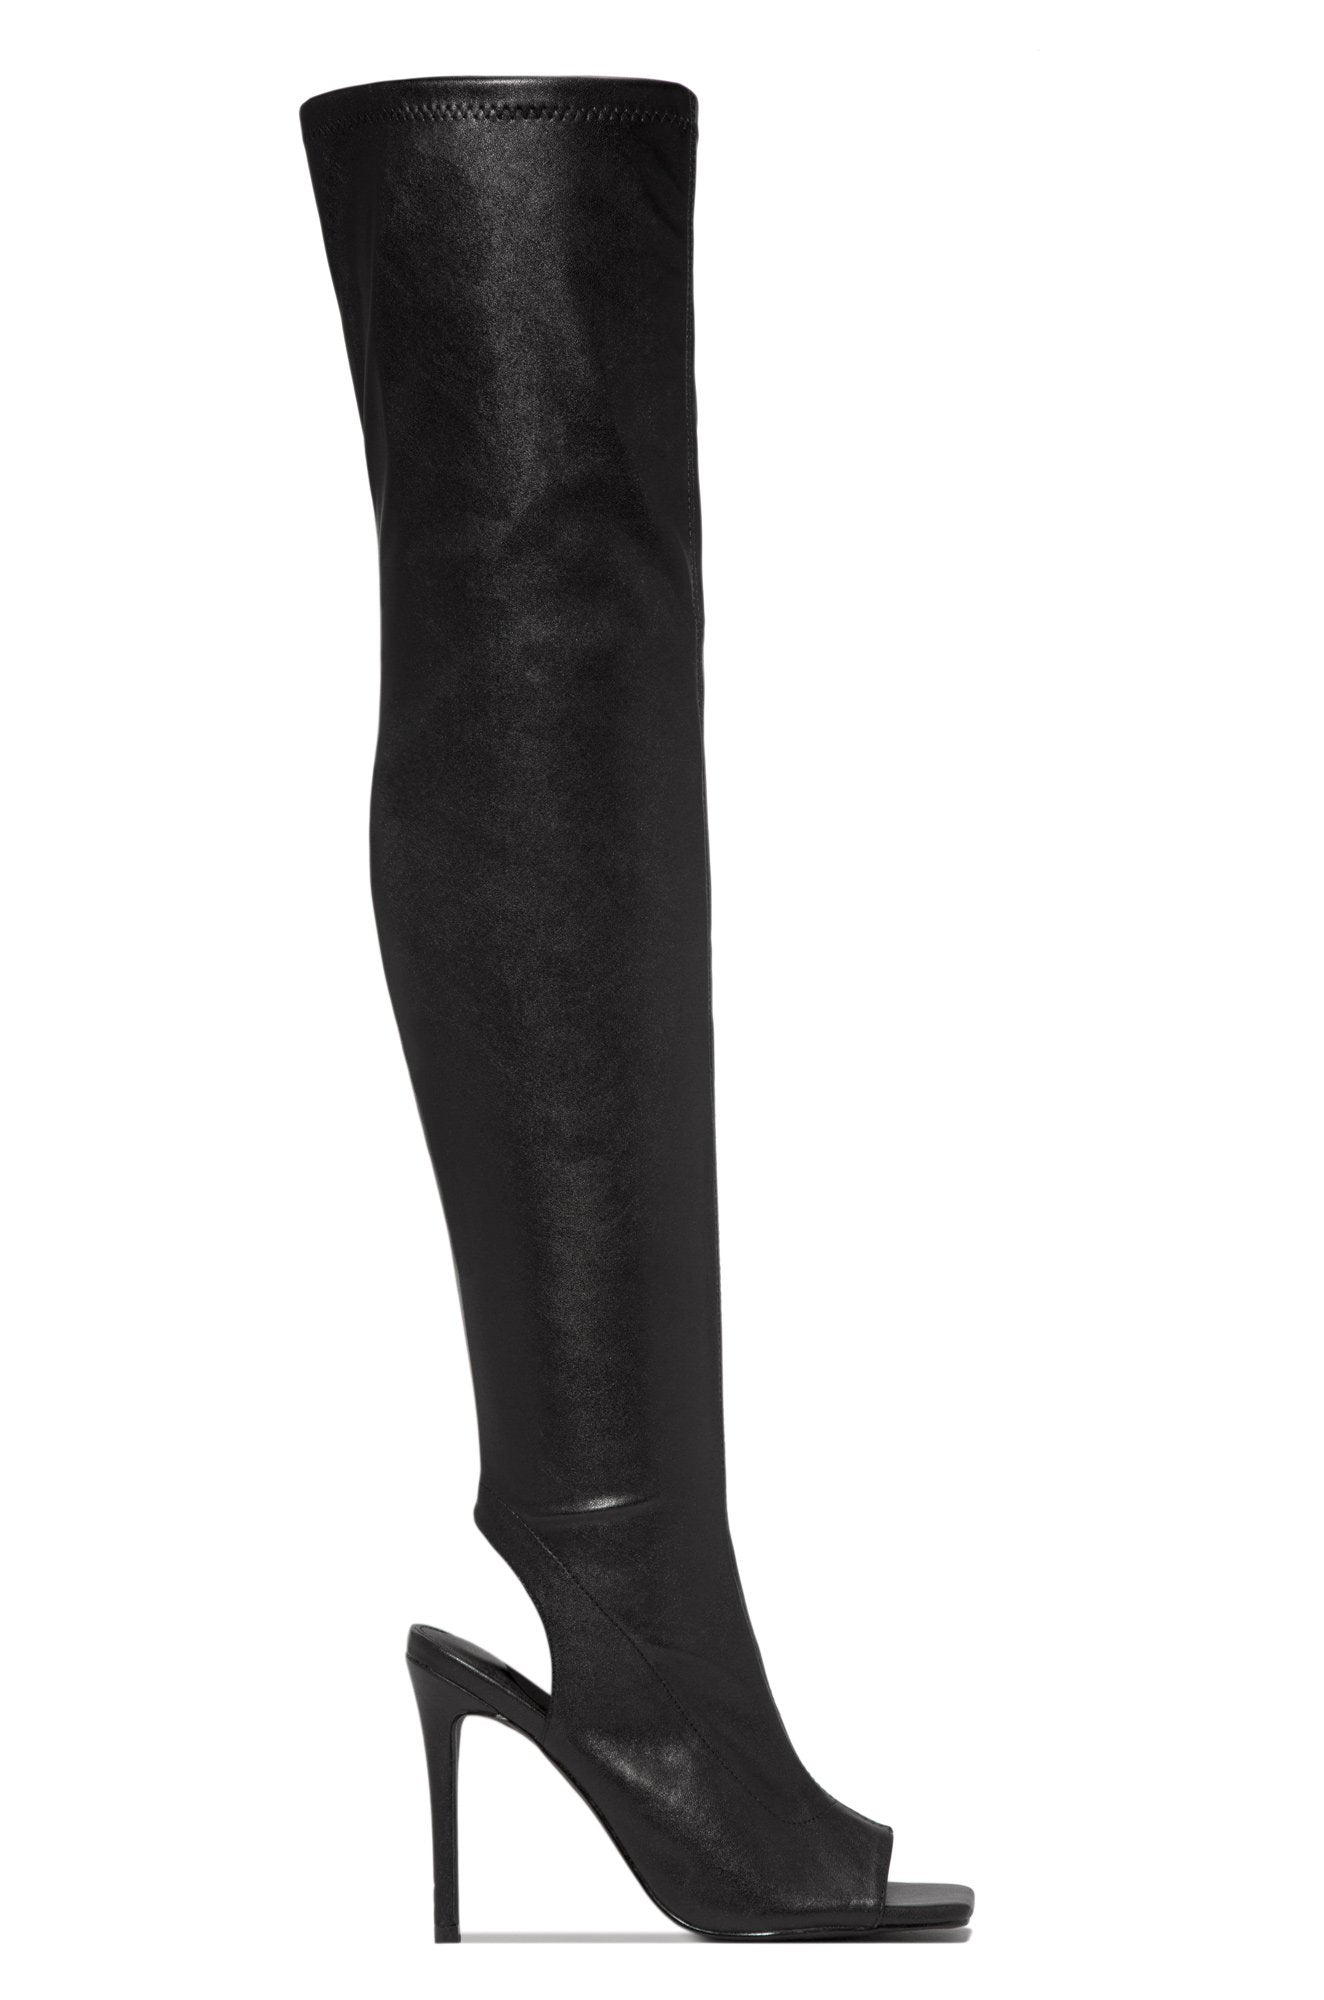 Fish Mouth Women's Boots Stiletto Heels Thin